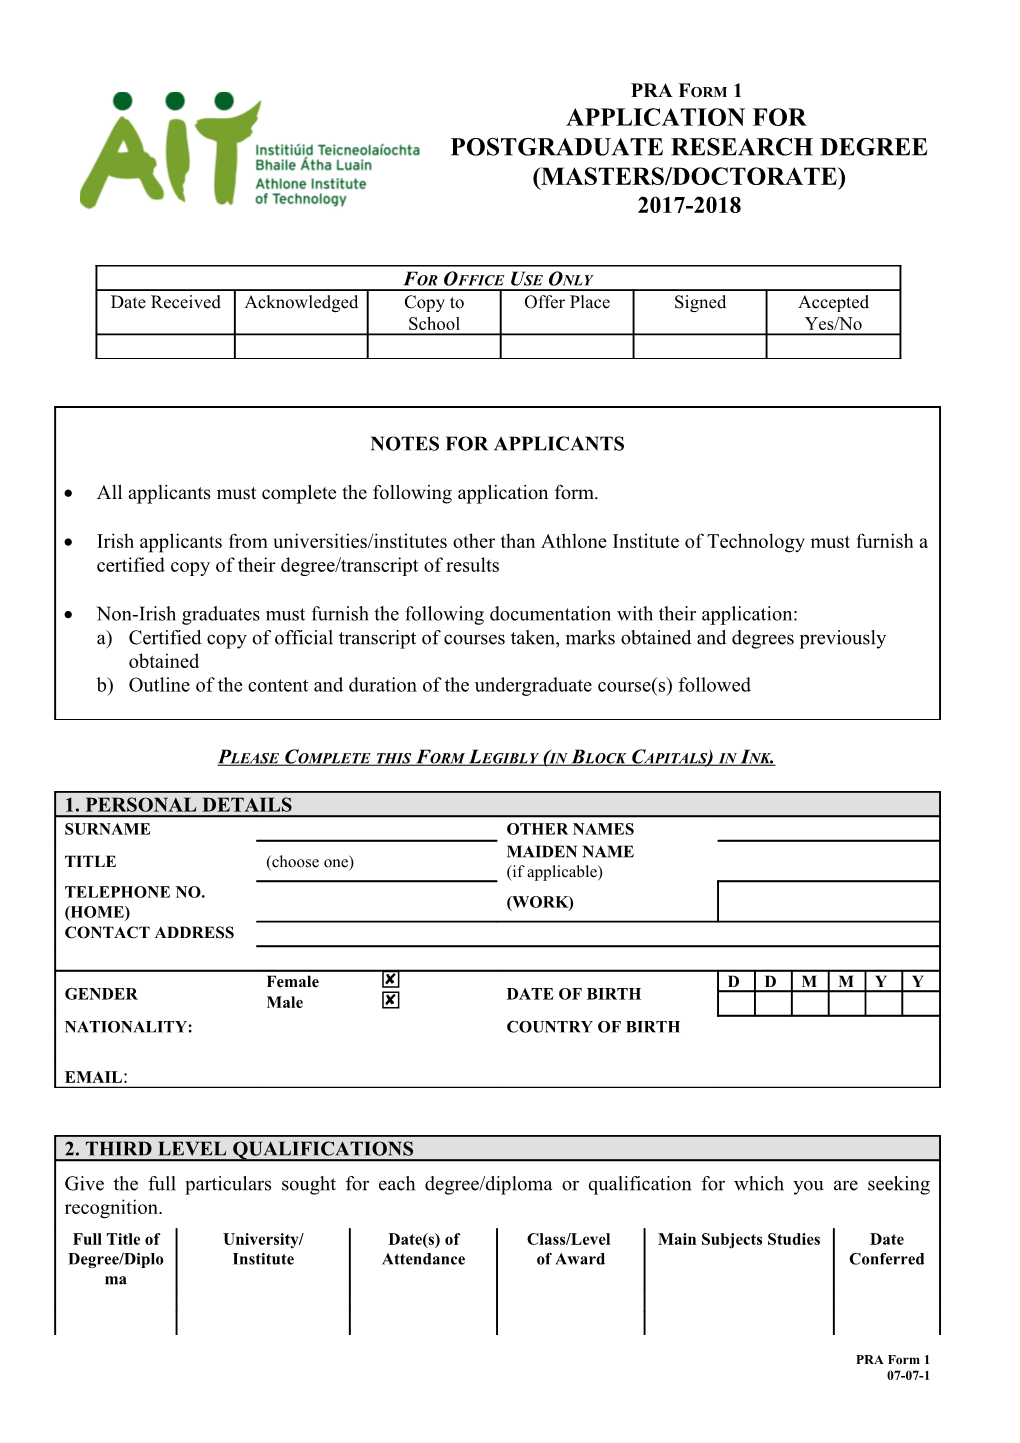 Application for Postgraduate Research Degree